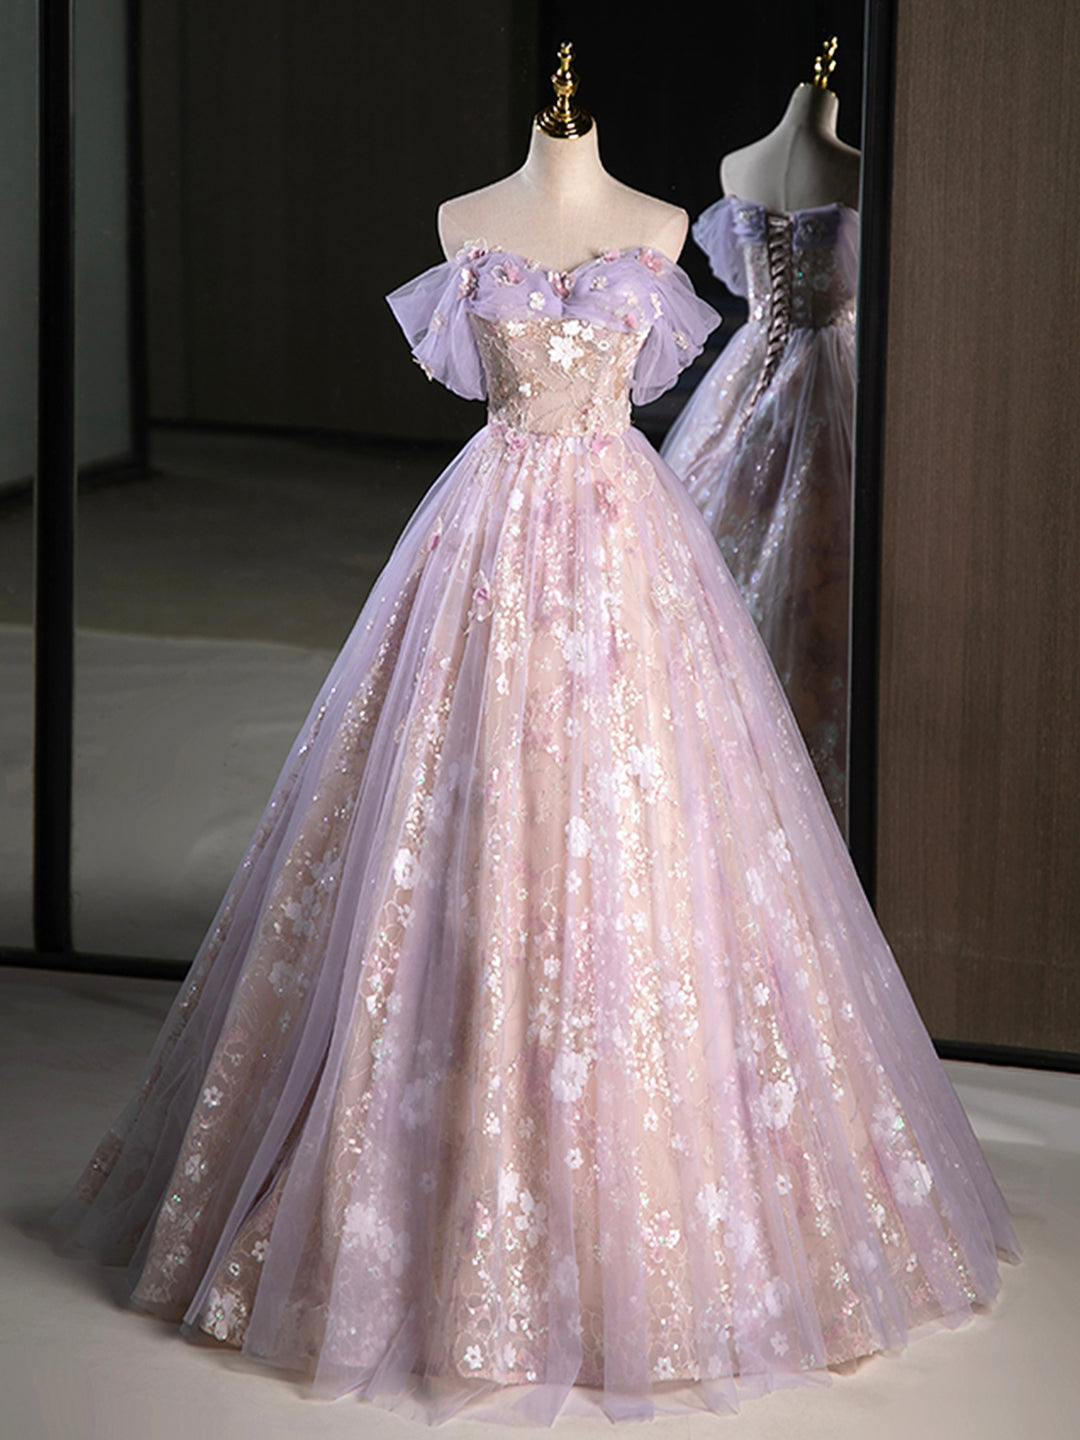 Wedding Photo Ideas, Purple A-Line Off the Shoulder Sequins Prom Dress, Lovely Tulle Corset Floor Length Evening Dress